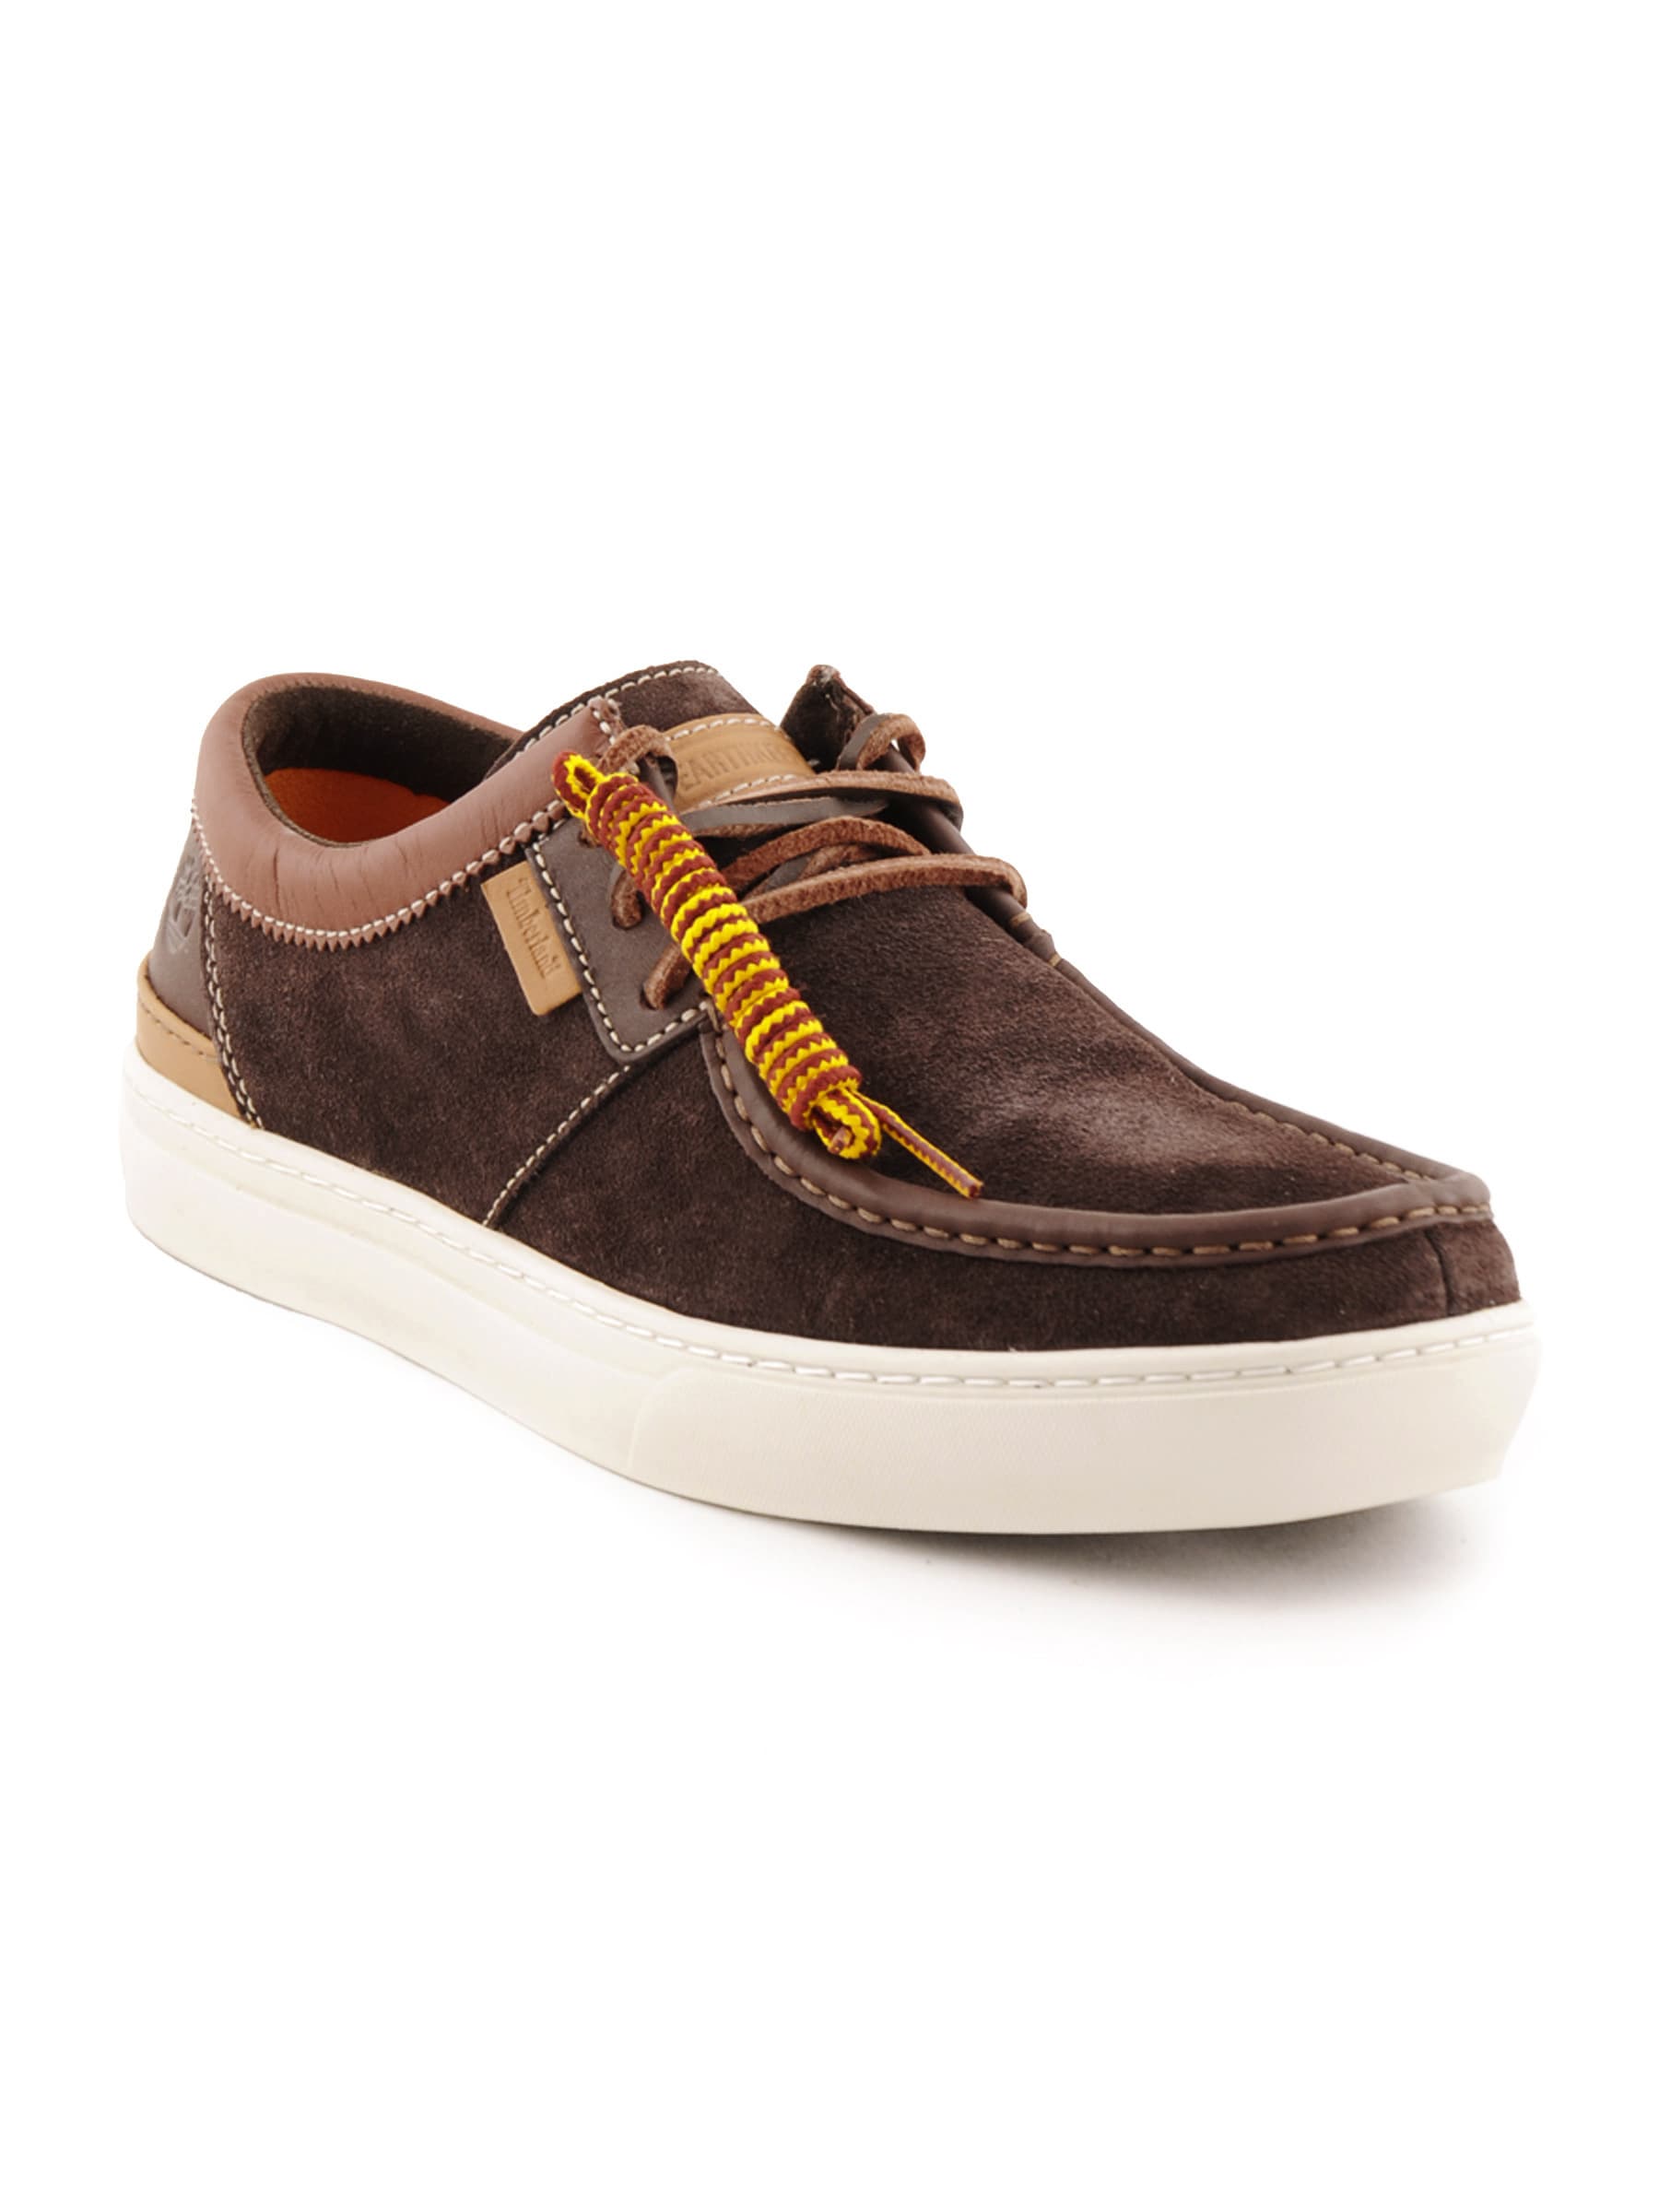 Timberland Men Casual Brown Casual Shoes